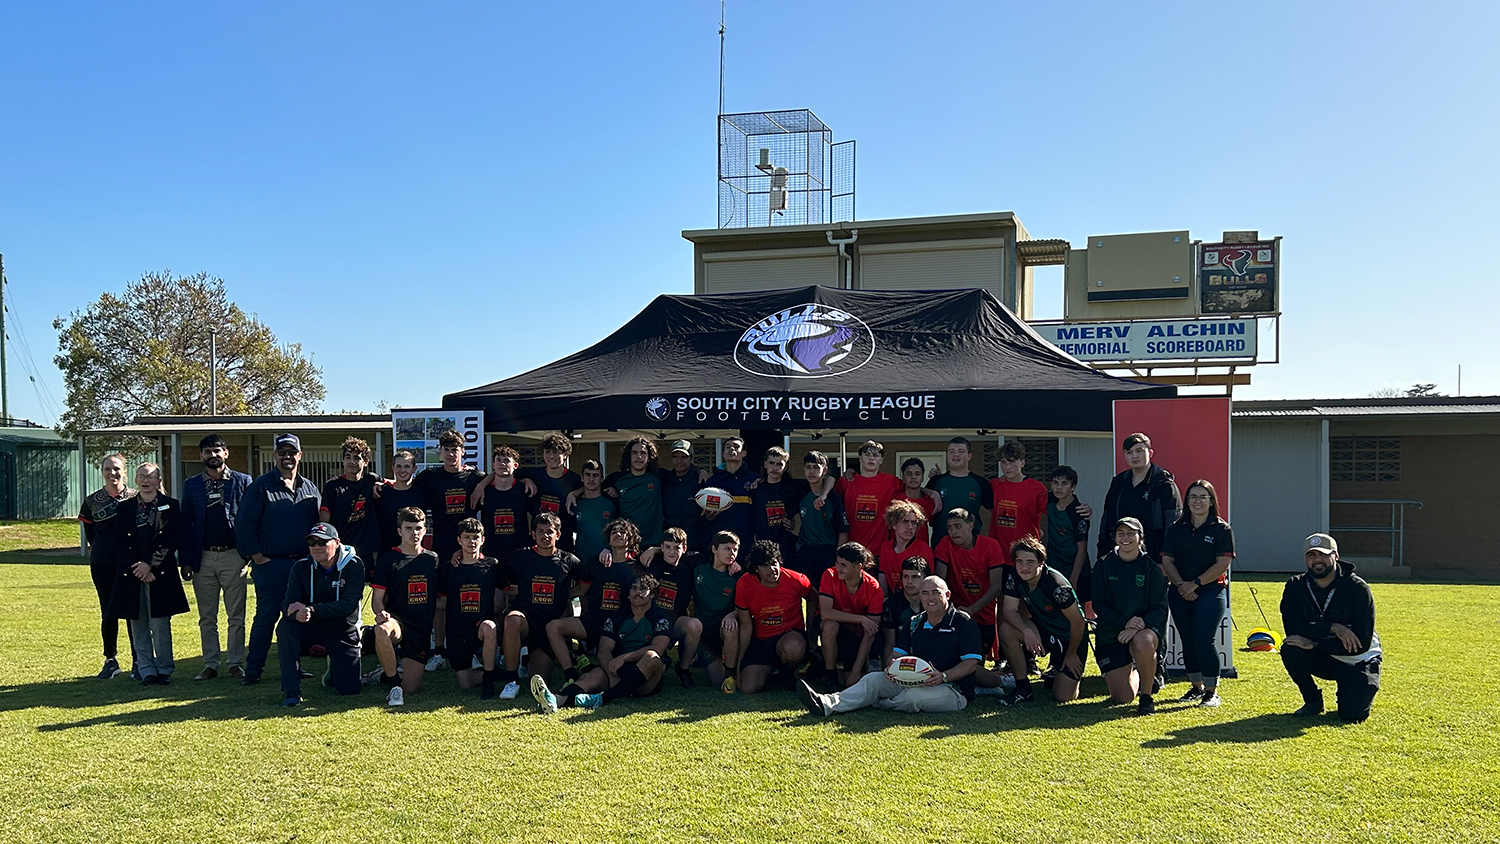 Image of teams from Mount Austin High School, Kooringal High School, and James Fallon High School, with sponsors and partners.